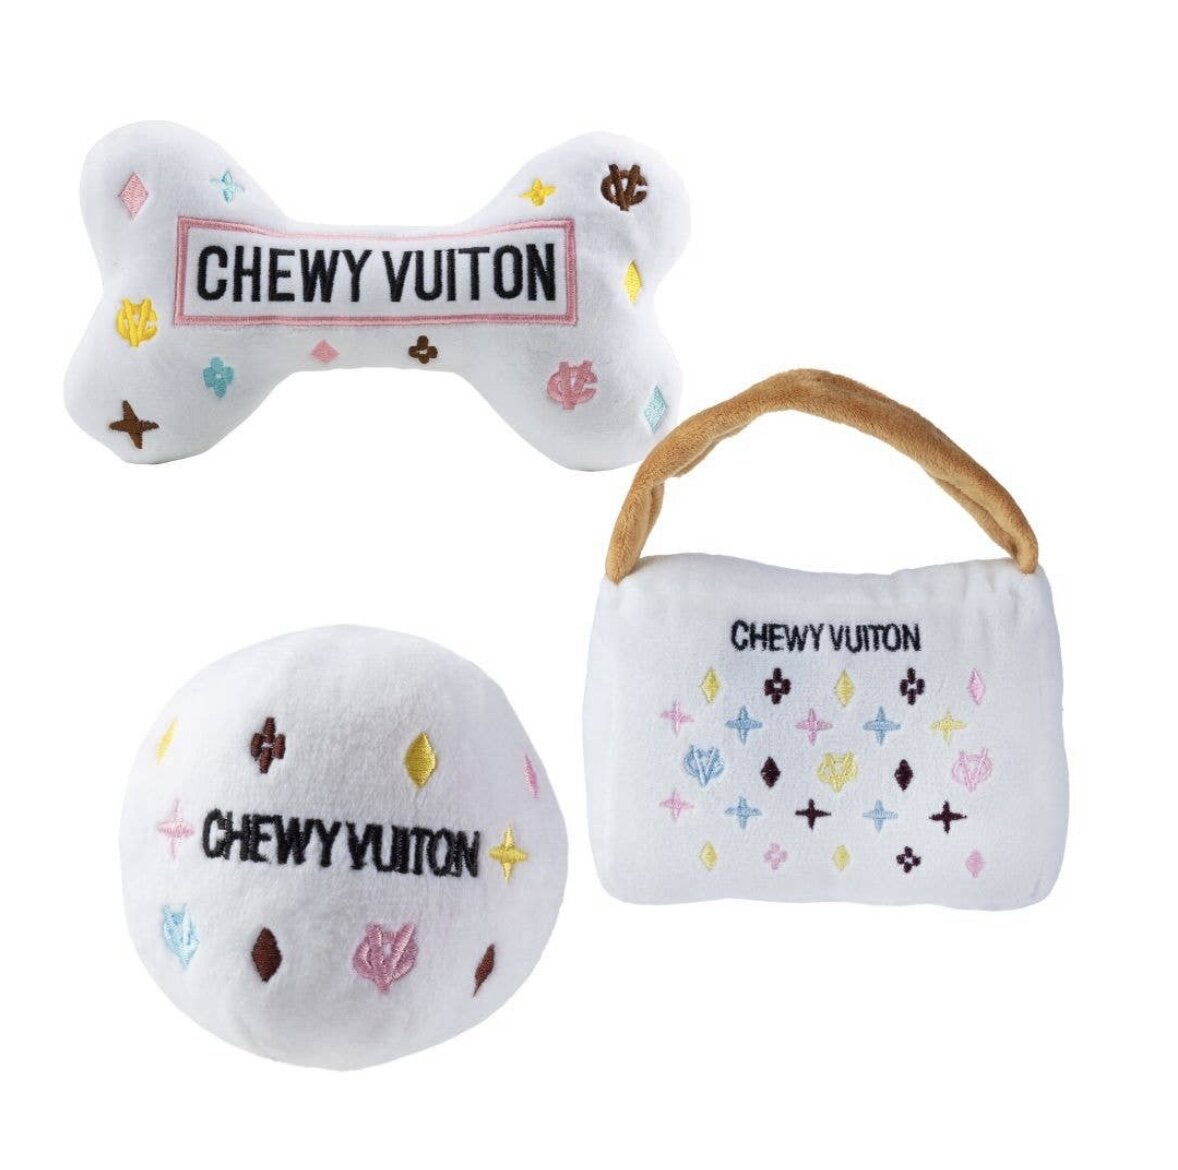 chewy vuitton dog toys